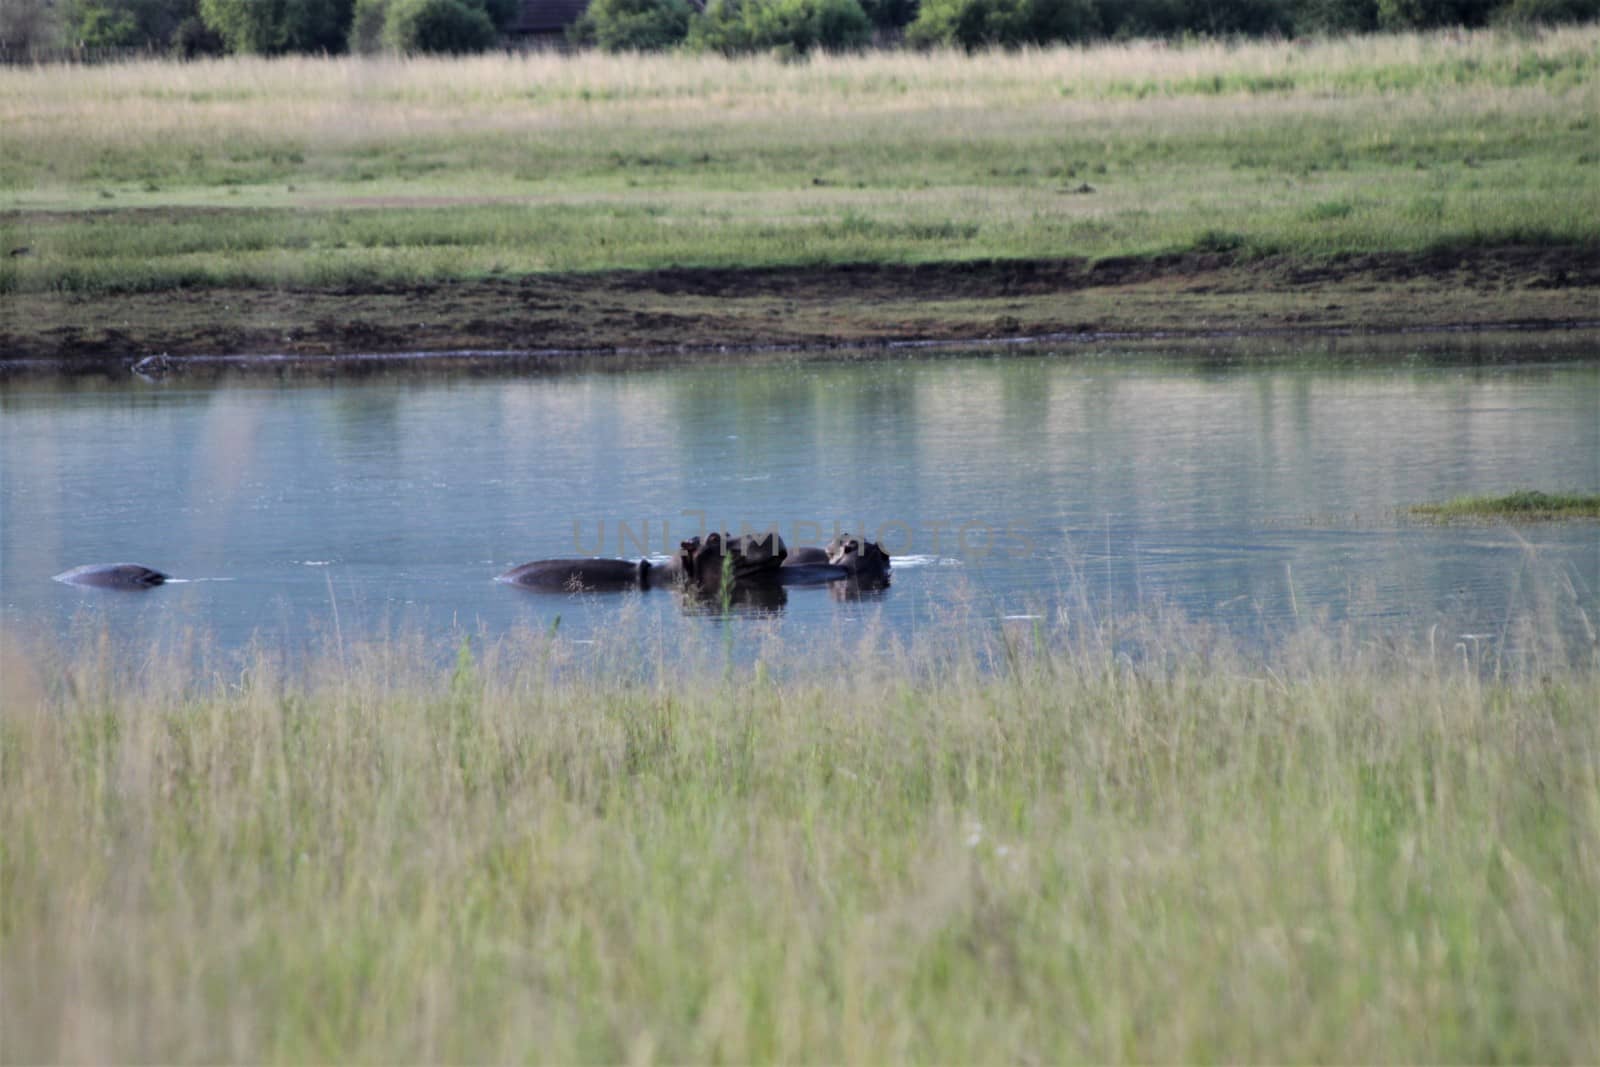 Some Hippos are lying in the water having a rest